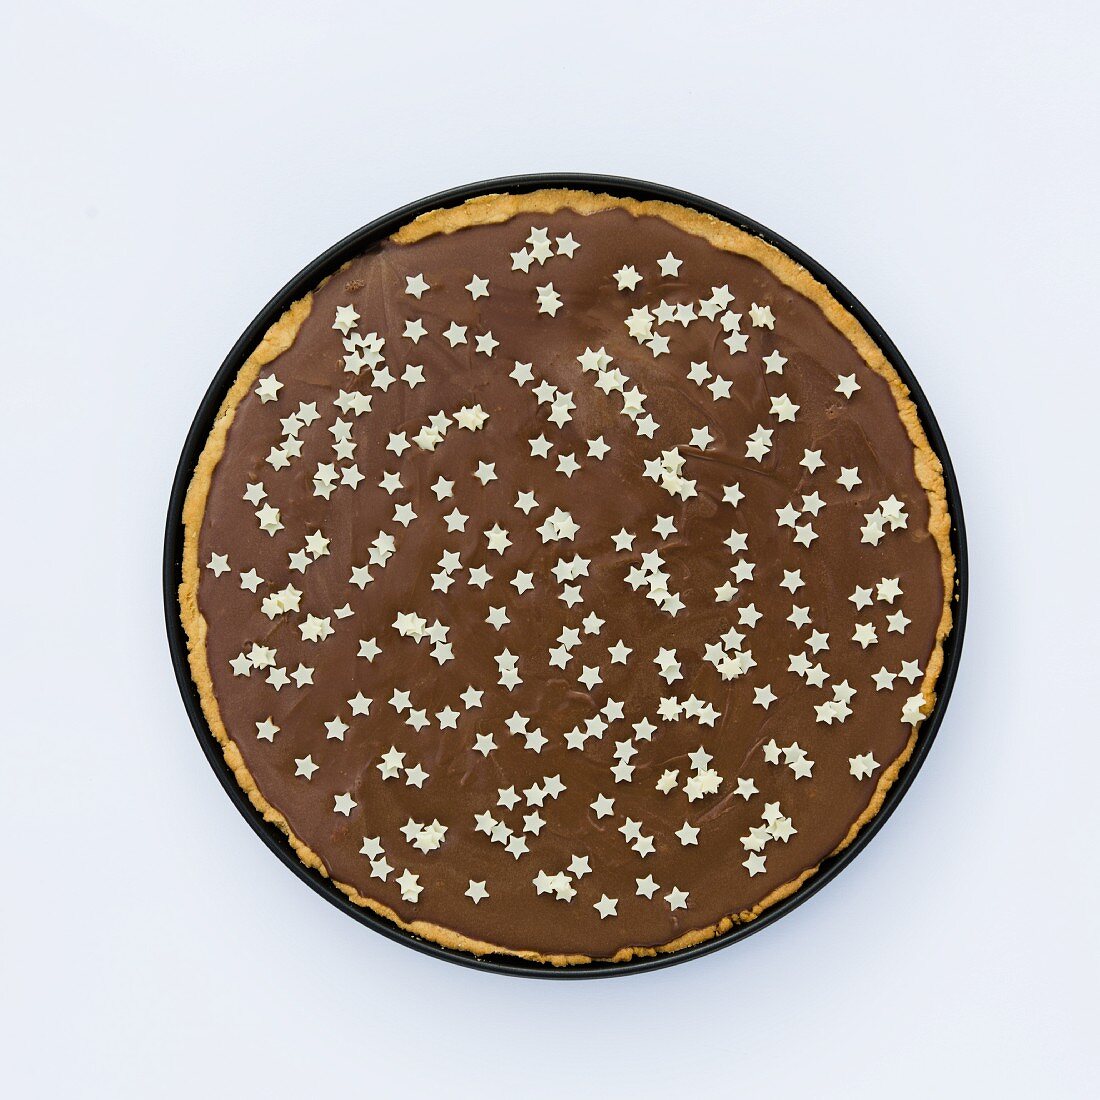 Tarte au chocolat decorated with small white stars (seen from above)